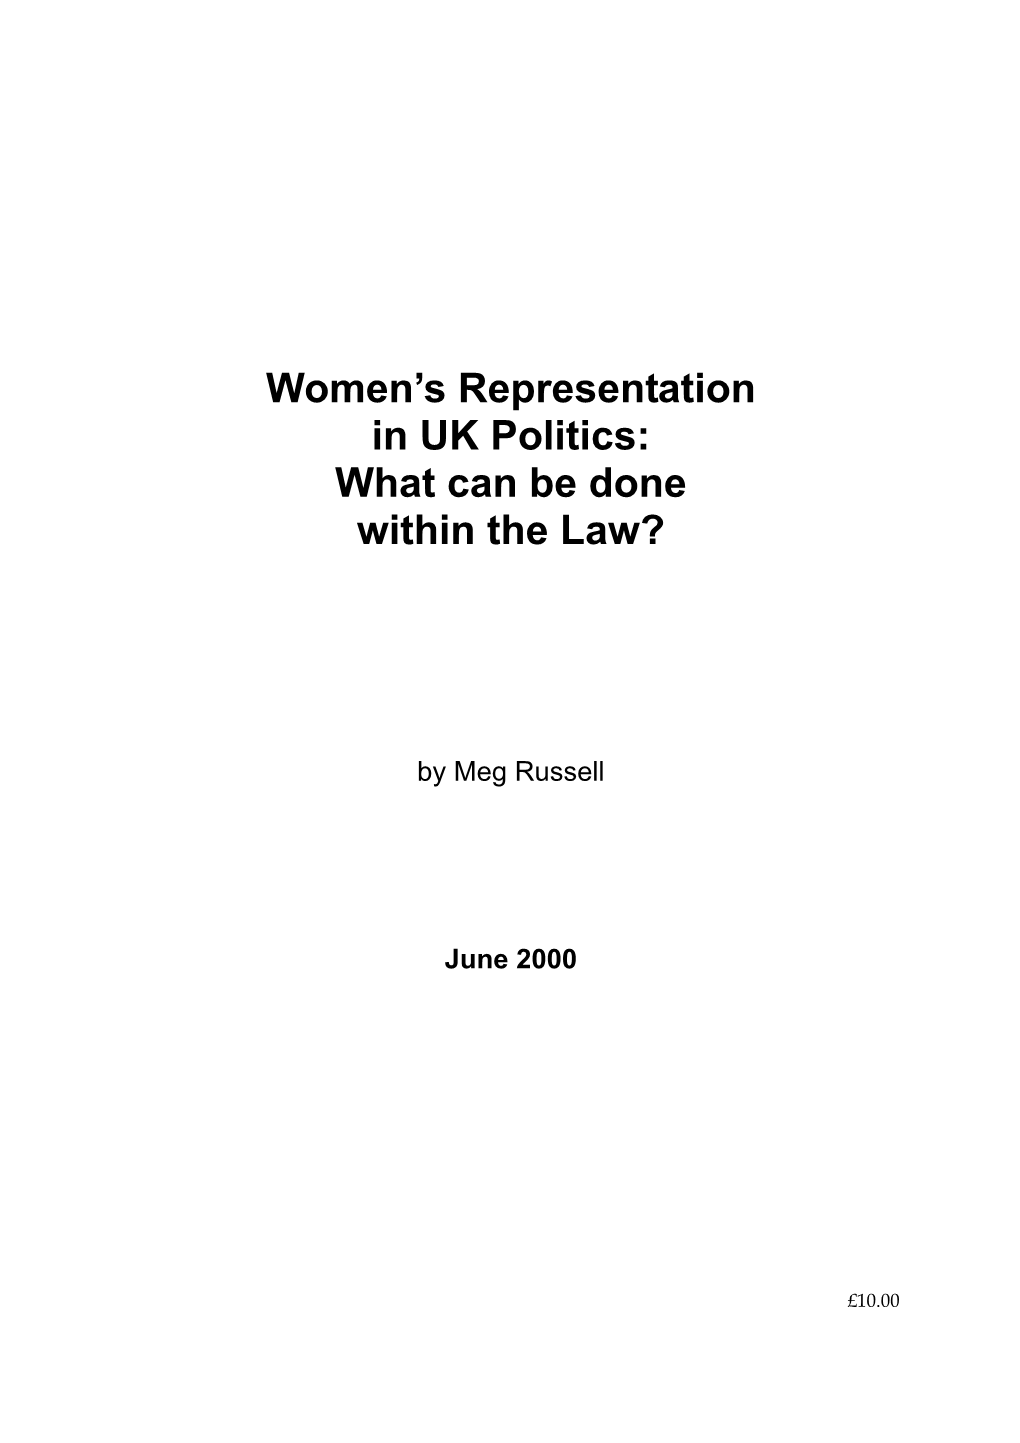 Women's Representation in Politics: What Can Be Done Within the Law?